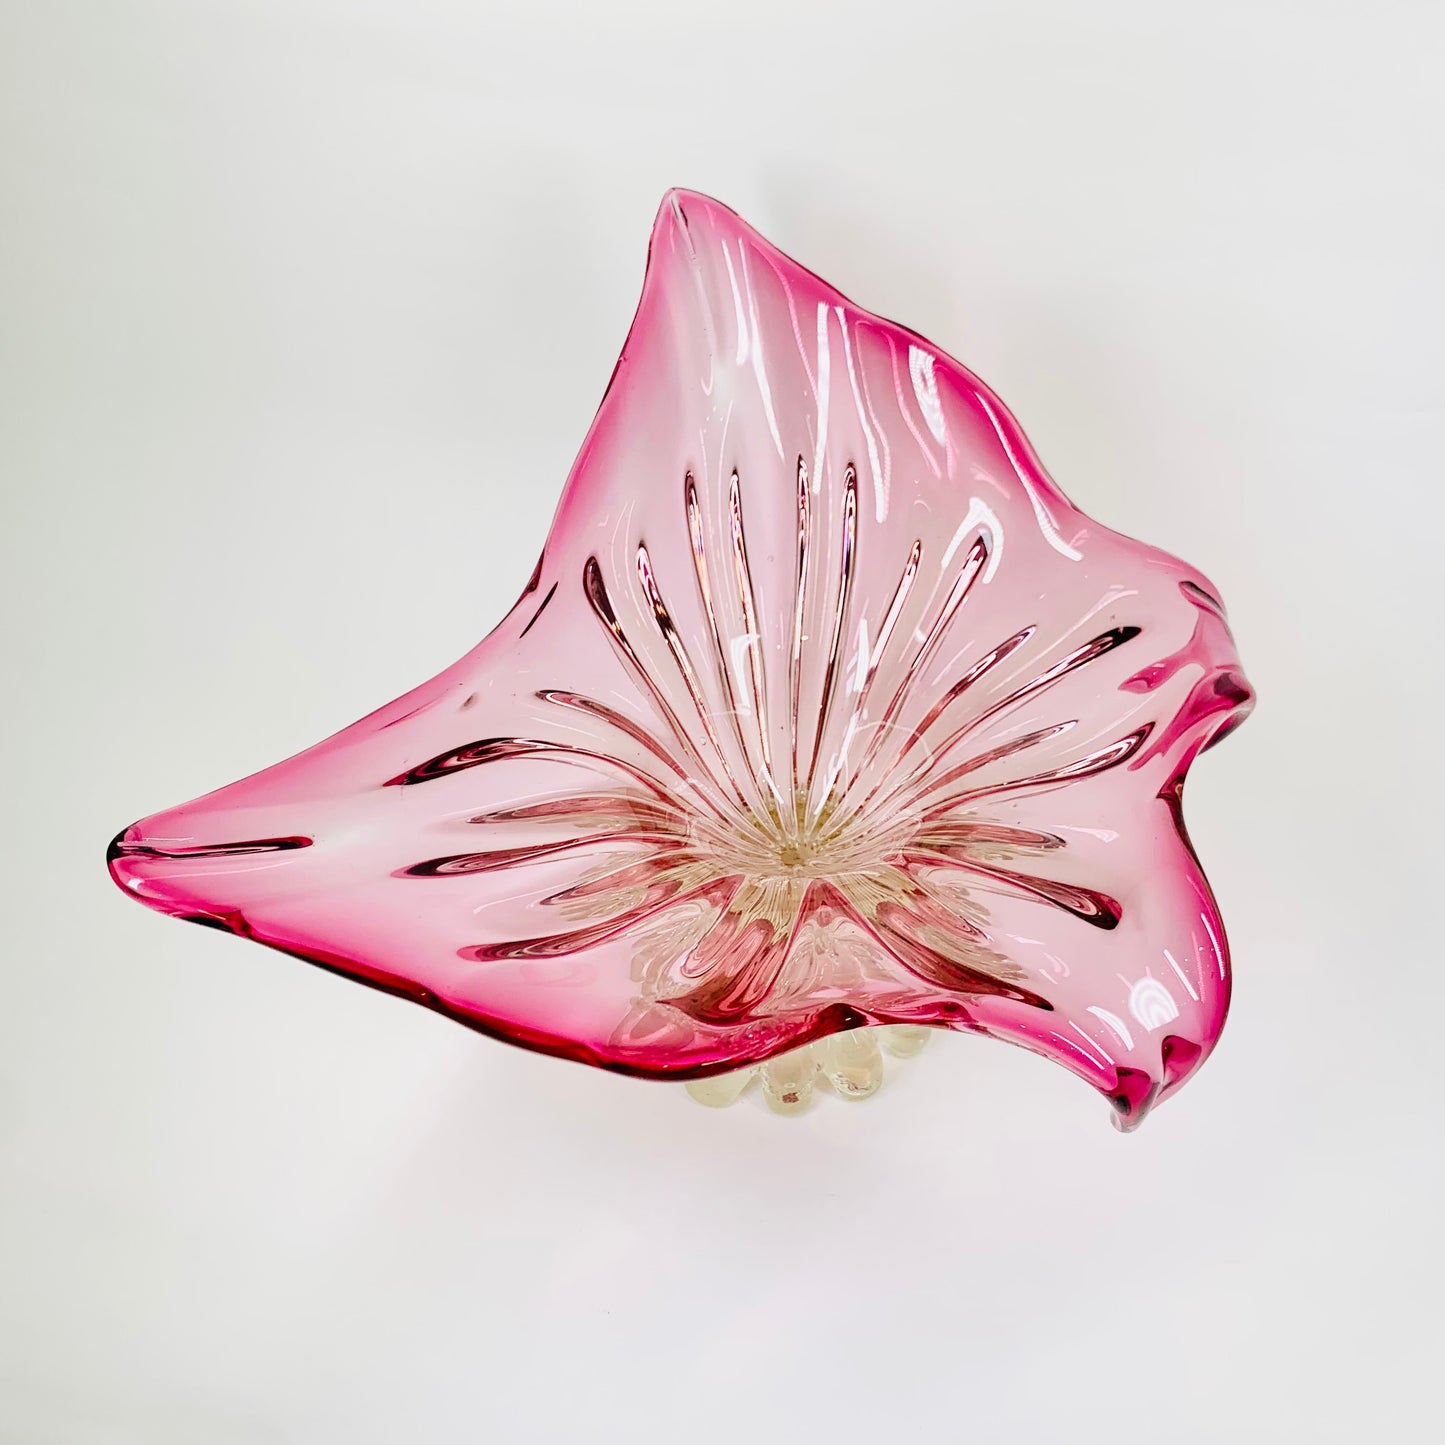 PINK SPIDER ORCHID BOWL